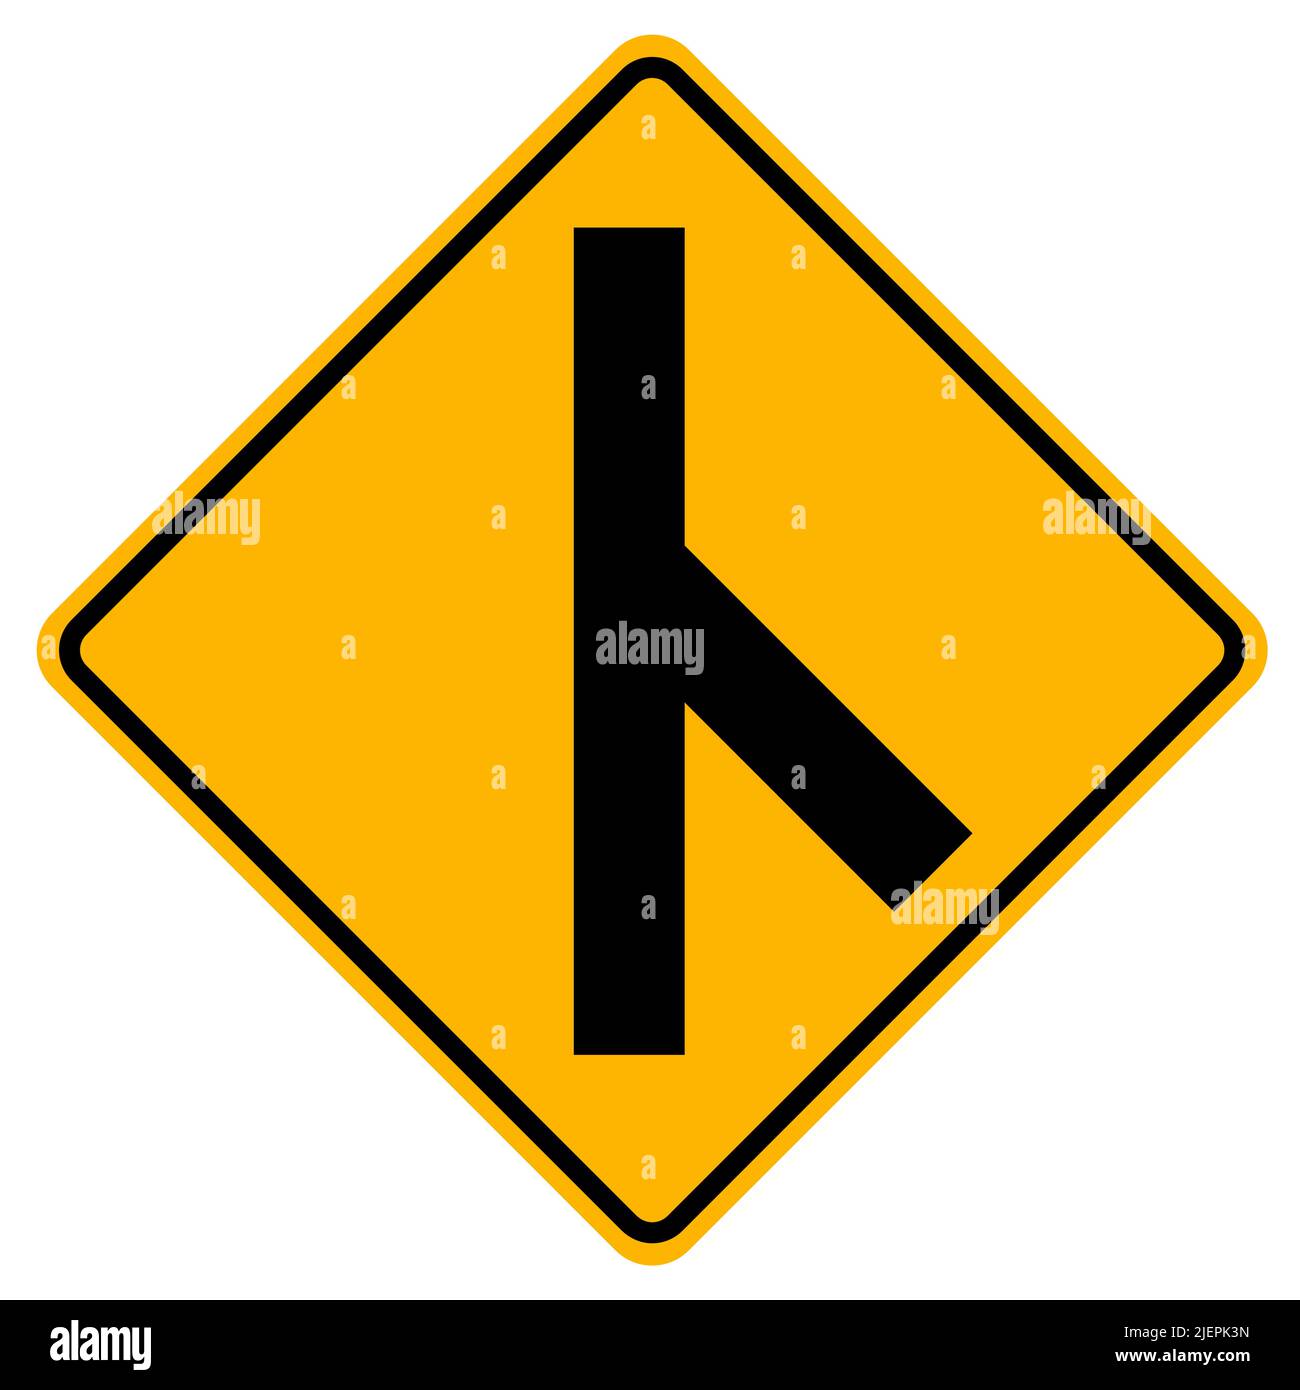 Warning signs Skewed side road junction on right on white background Stock Vector